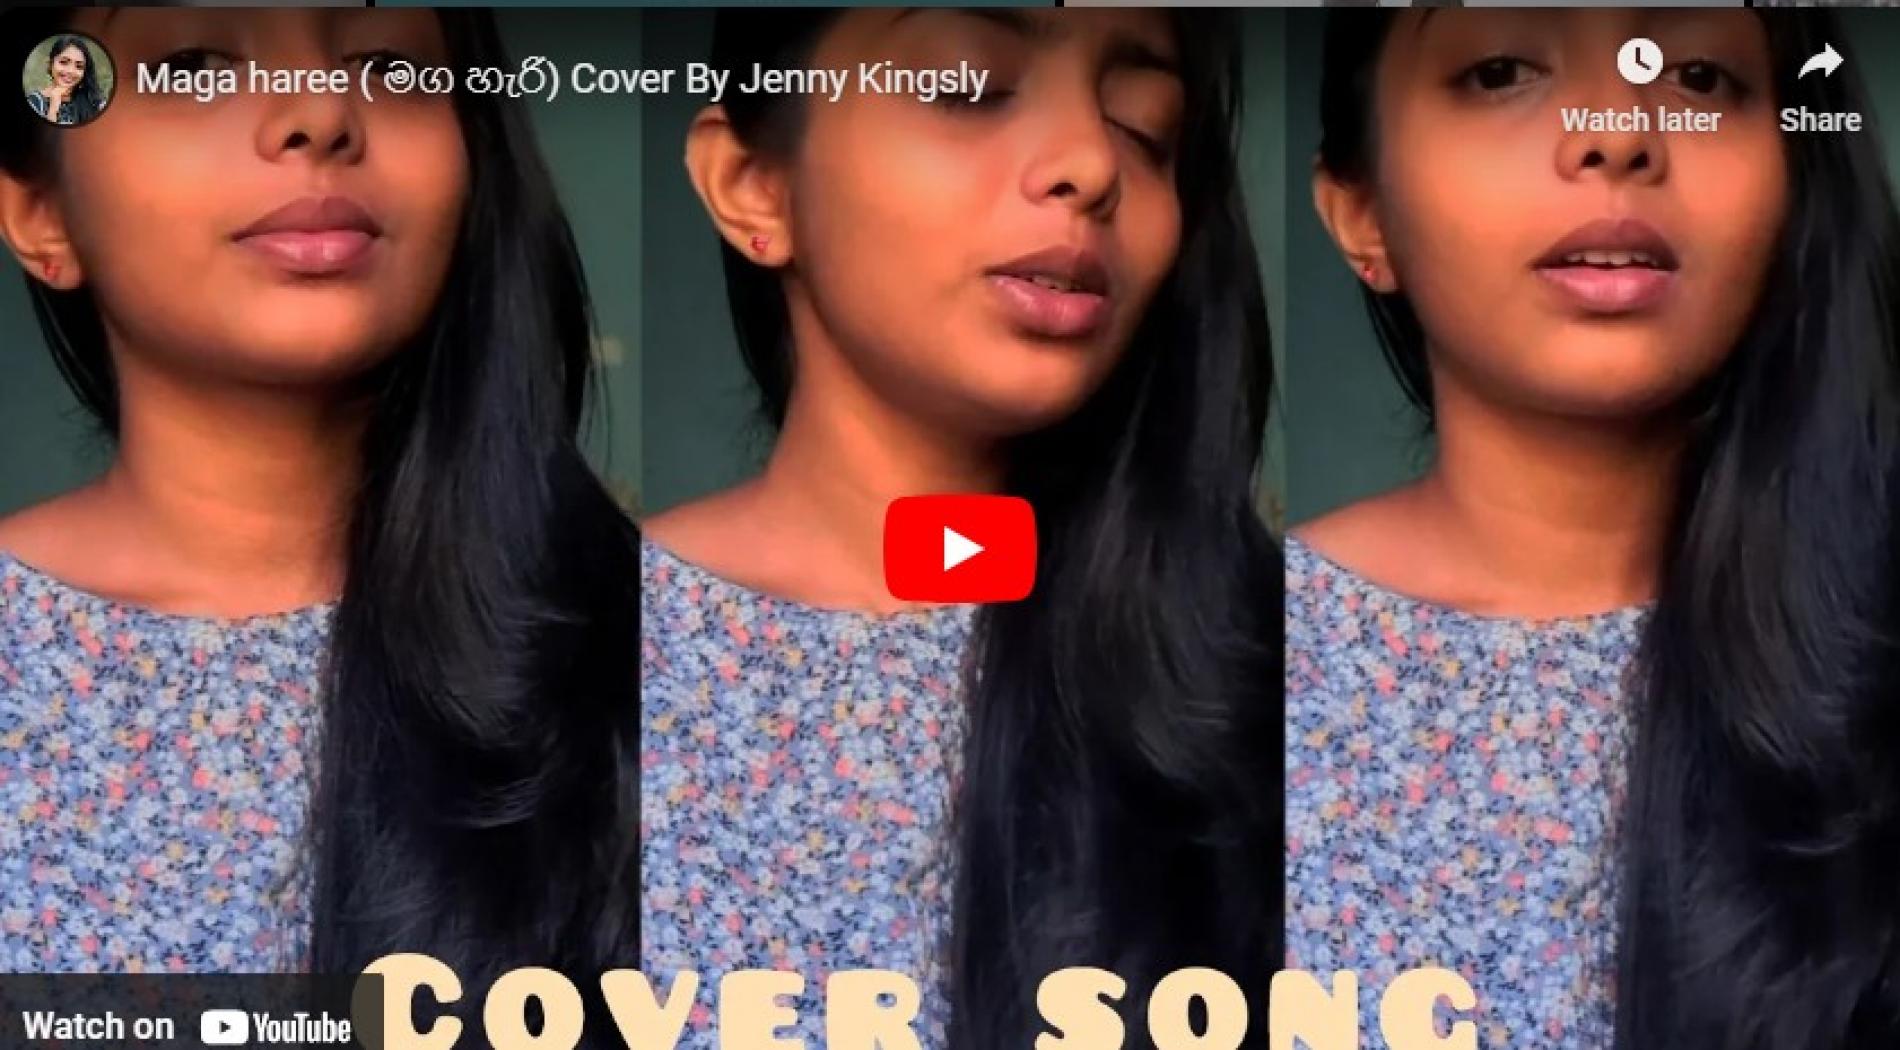 New Music : Maga Haree (මග හැරි) Cover By Jenny Kingsly